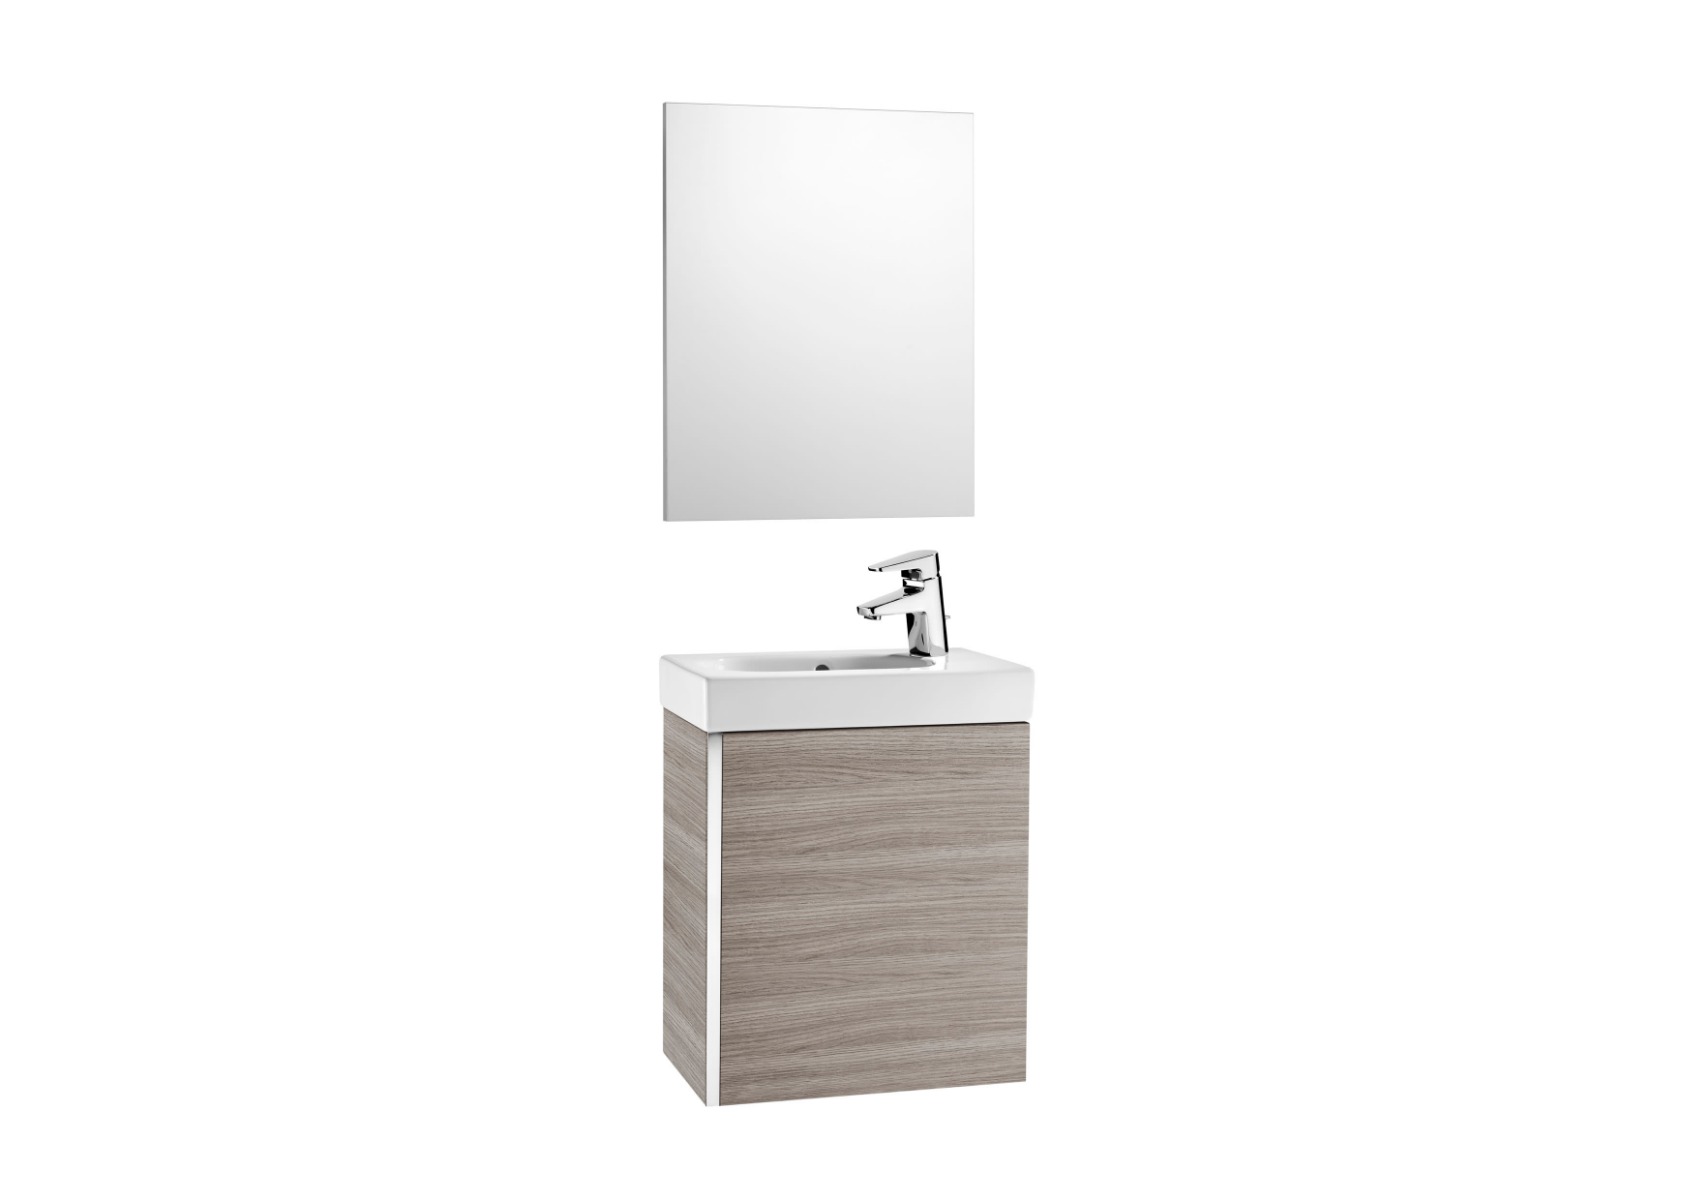 Pack with mirror (base unit, basin and mirror) 450 x 250 x 575 mm